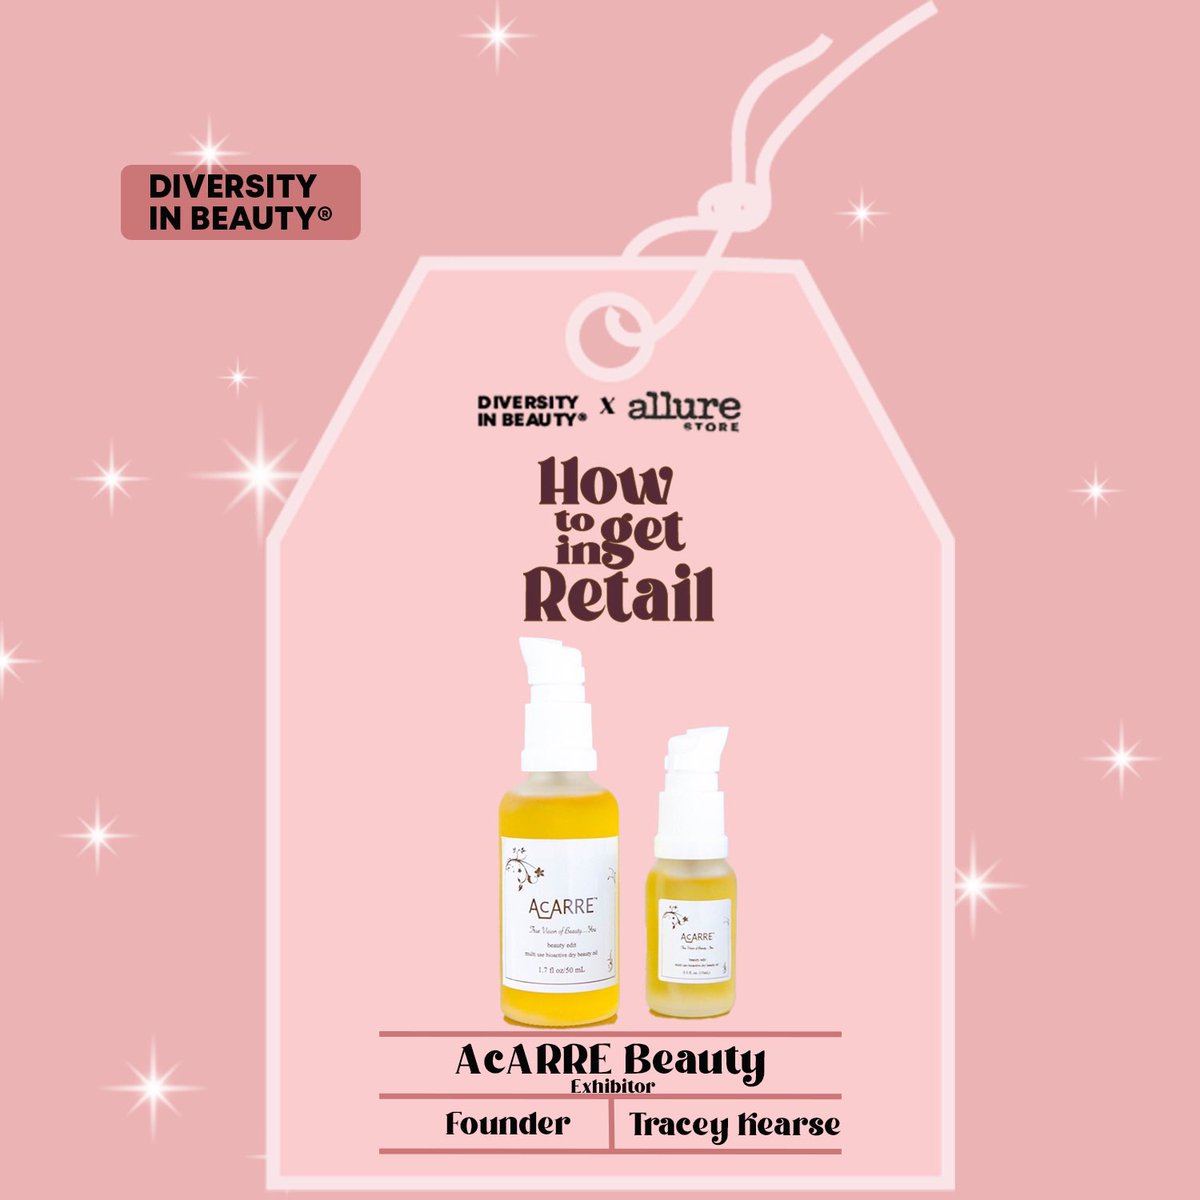 I'm exhibiting for a chance to get my products into a major retail store at the 'How to Get In Retail Event' hosted by @diversityinbeauty at the Allure Store Nov. 17 from 7:30-10pm! Come out and shop with me and other emerging BIPOC brands! Tickets at DiversityInbeauty.com!